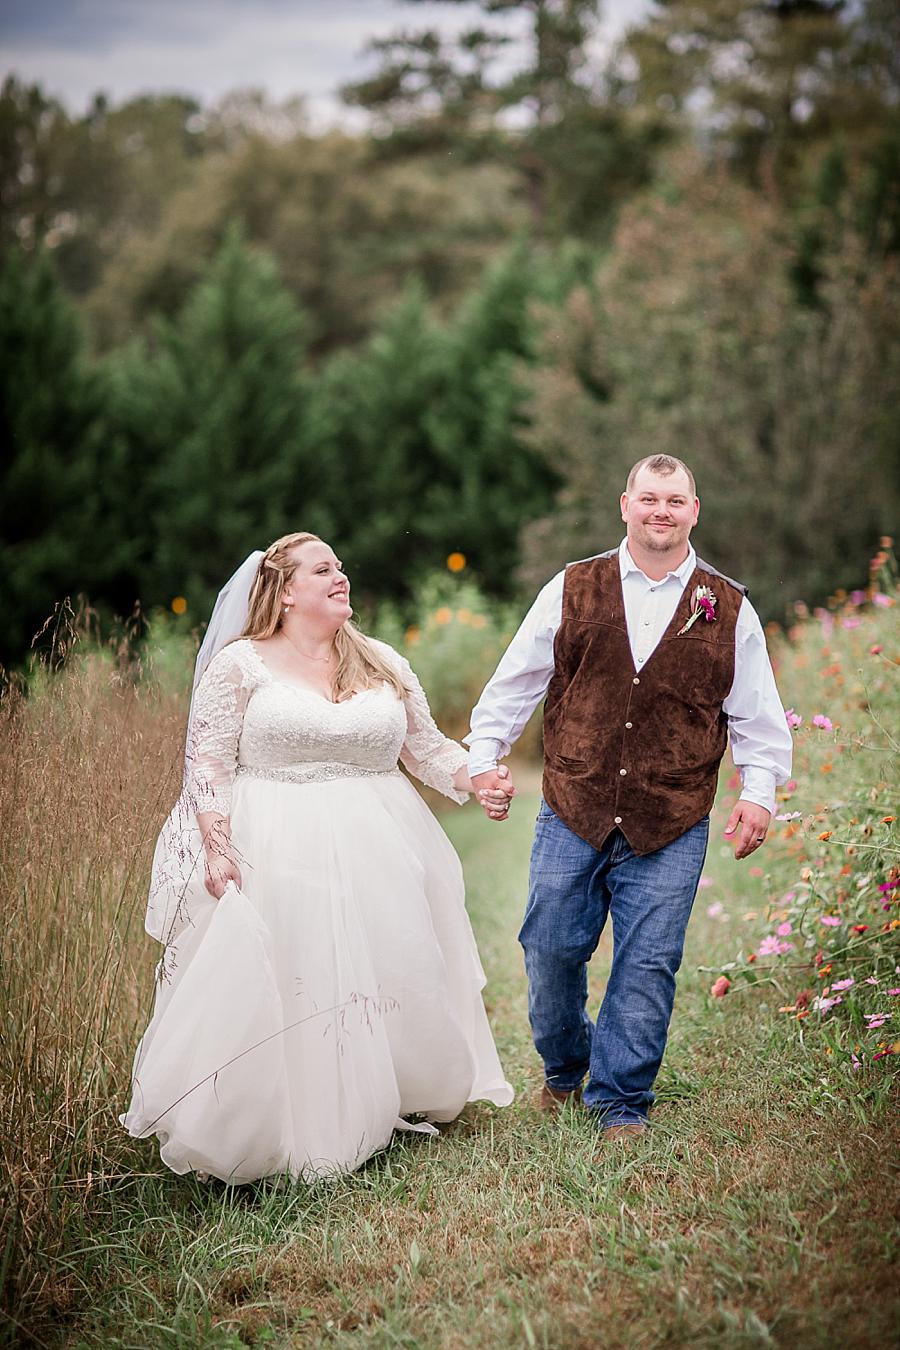 Walking together at this Sampson's Hollow Fall Wedding by Knoxville Wedding Photographer, Amanda May Photos.